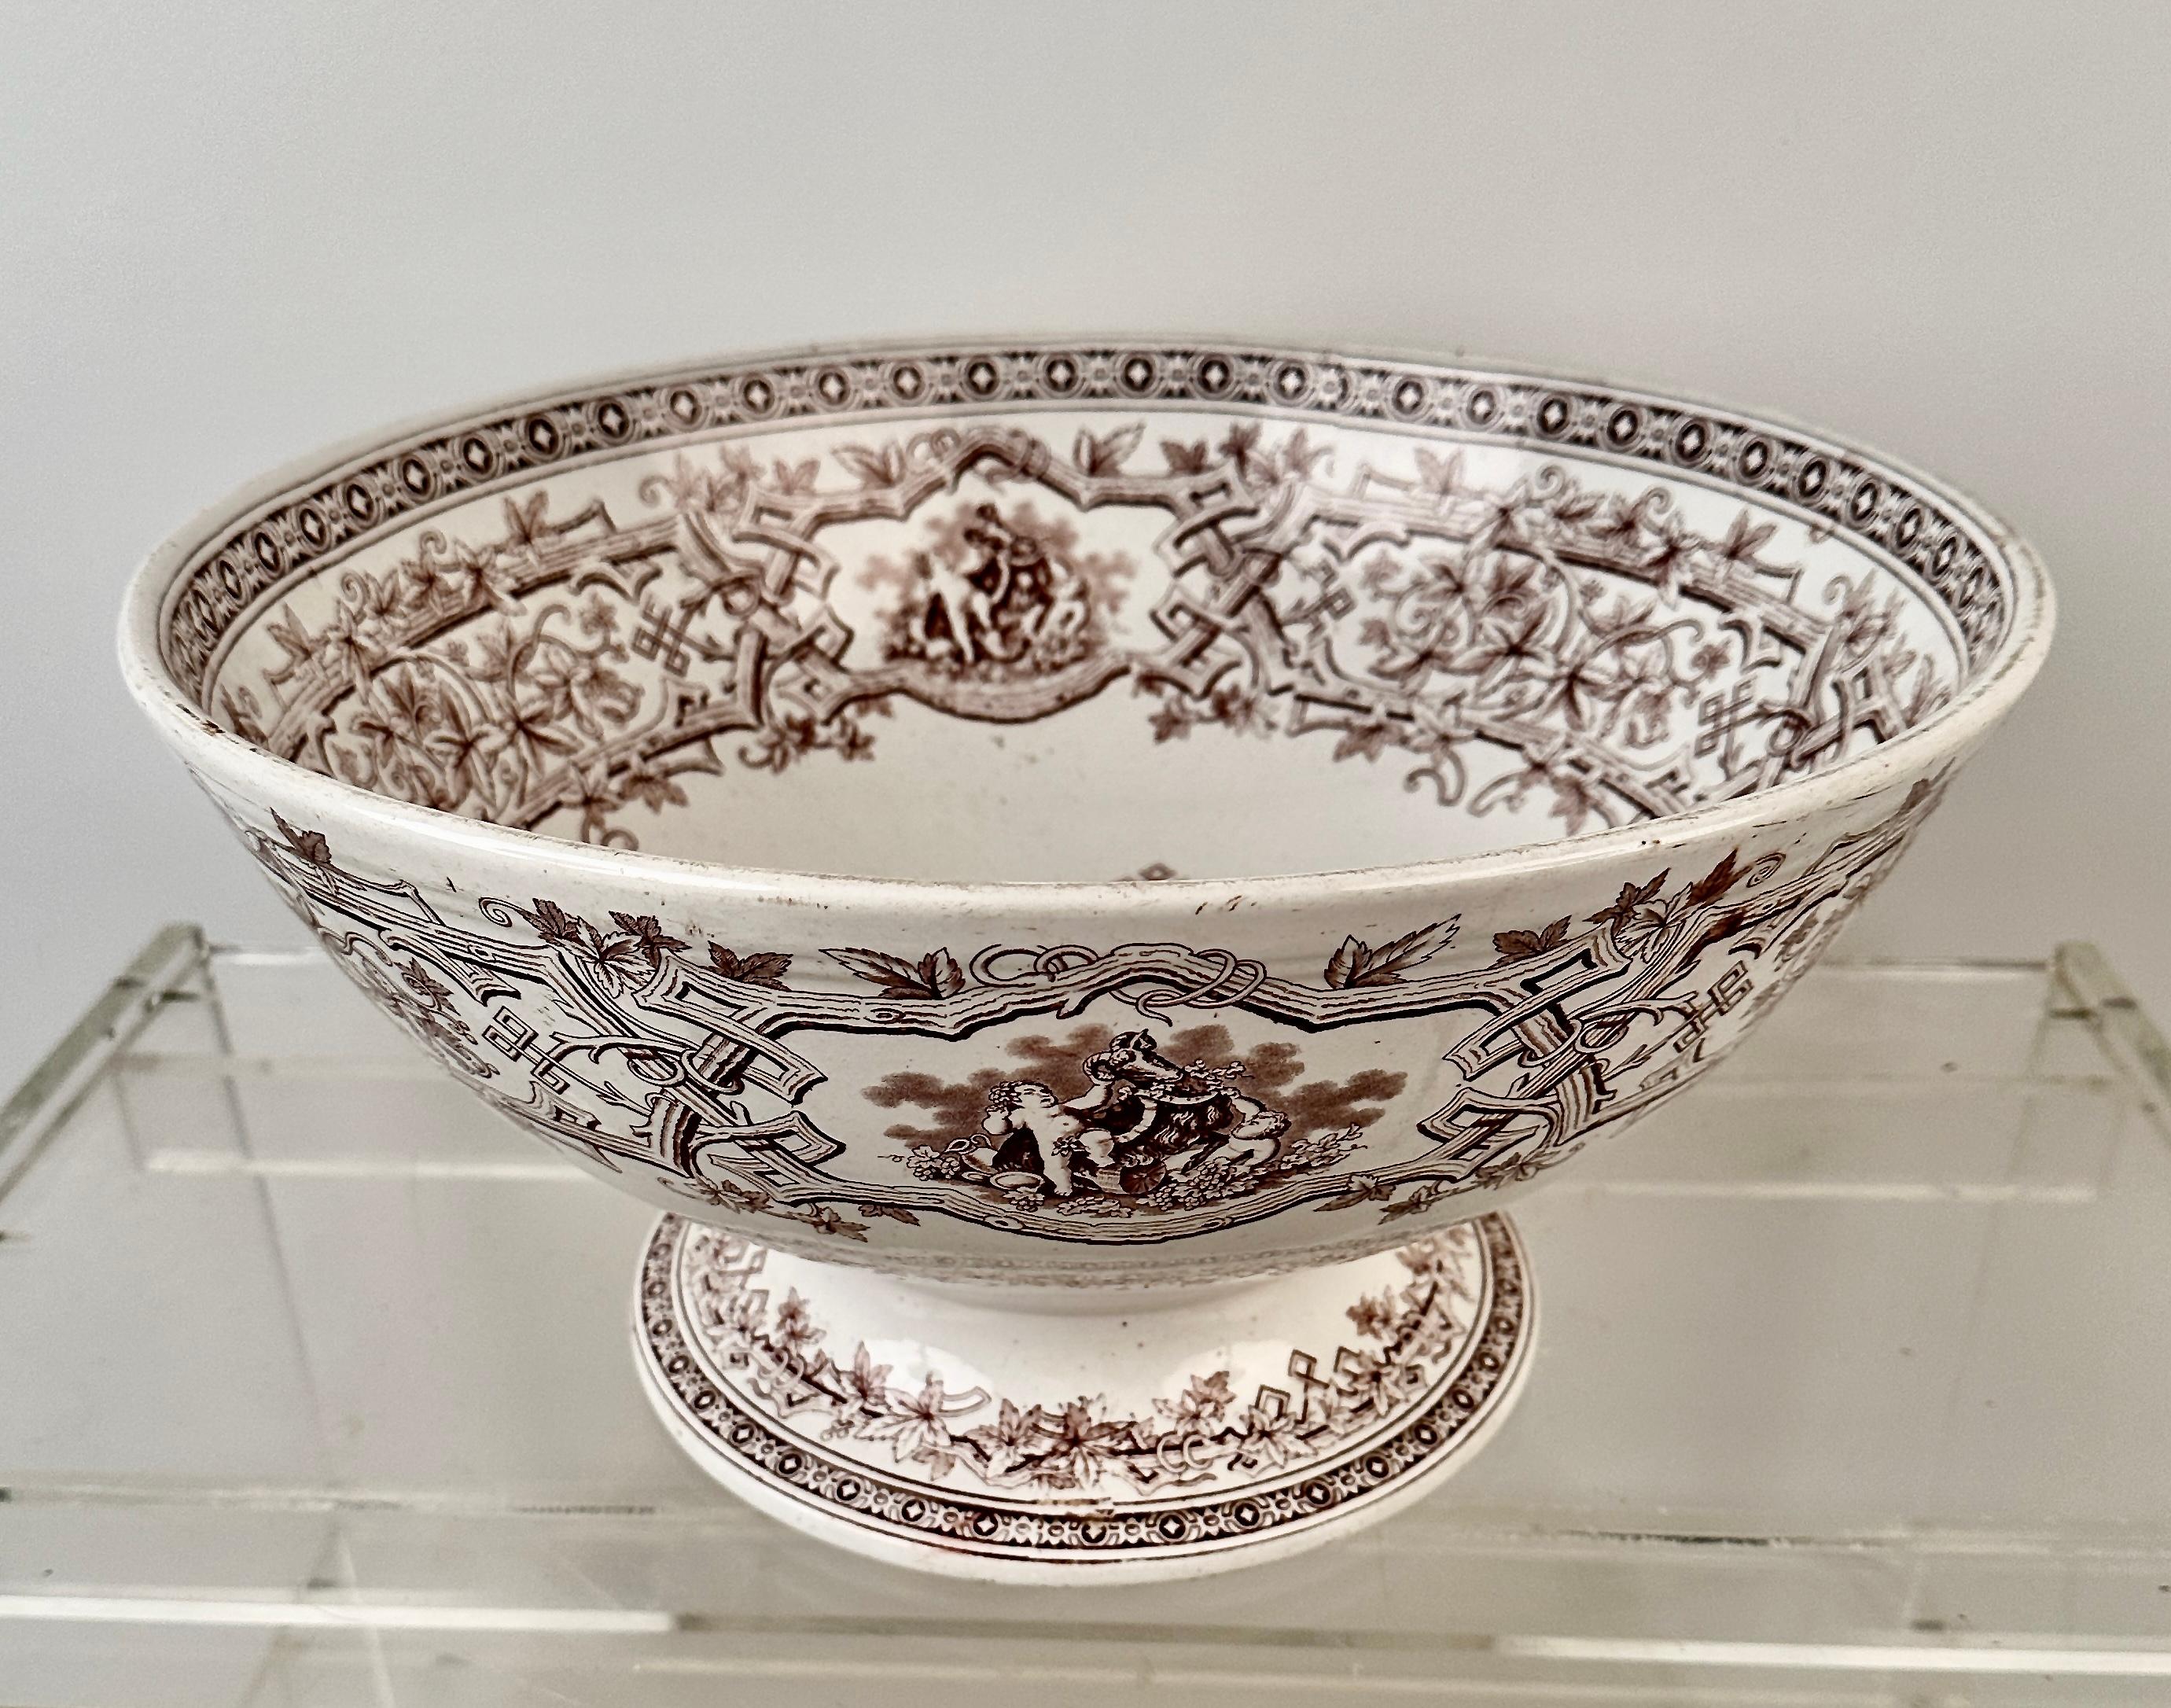 19th Century !9th C English Transferware Punch Bowl by Furnival For Sale